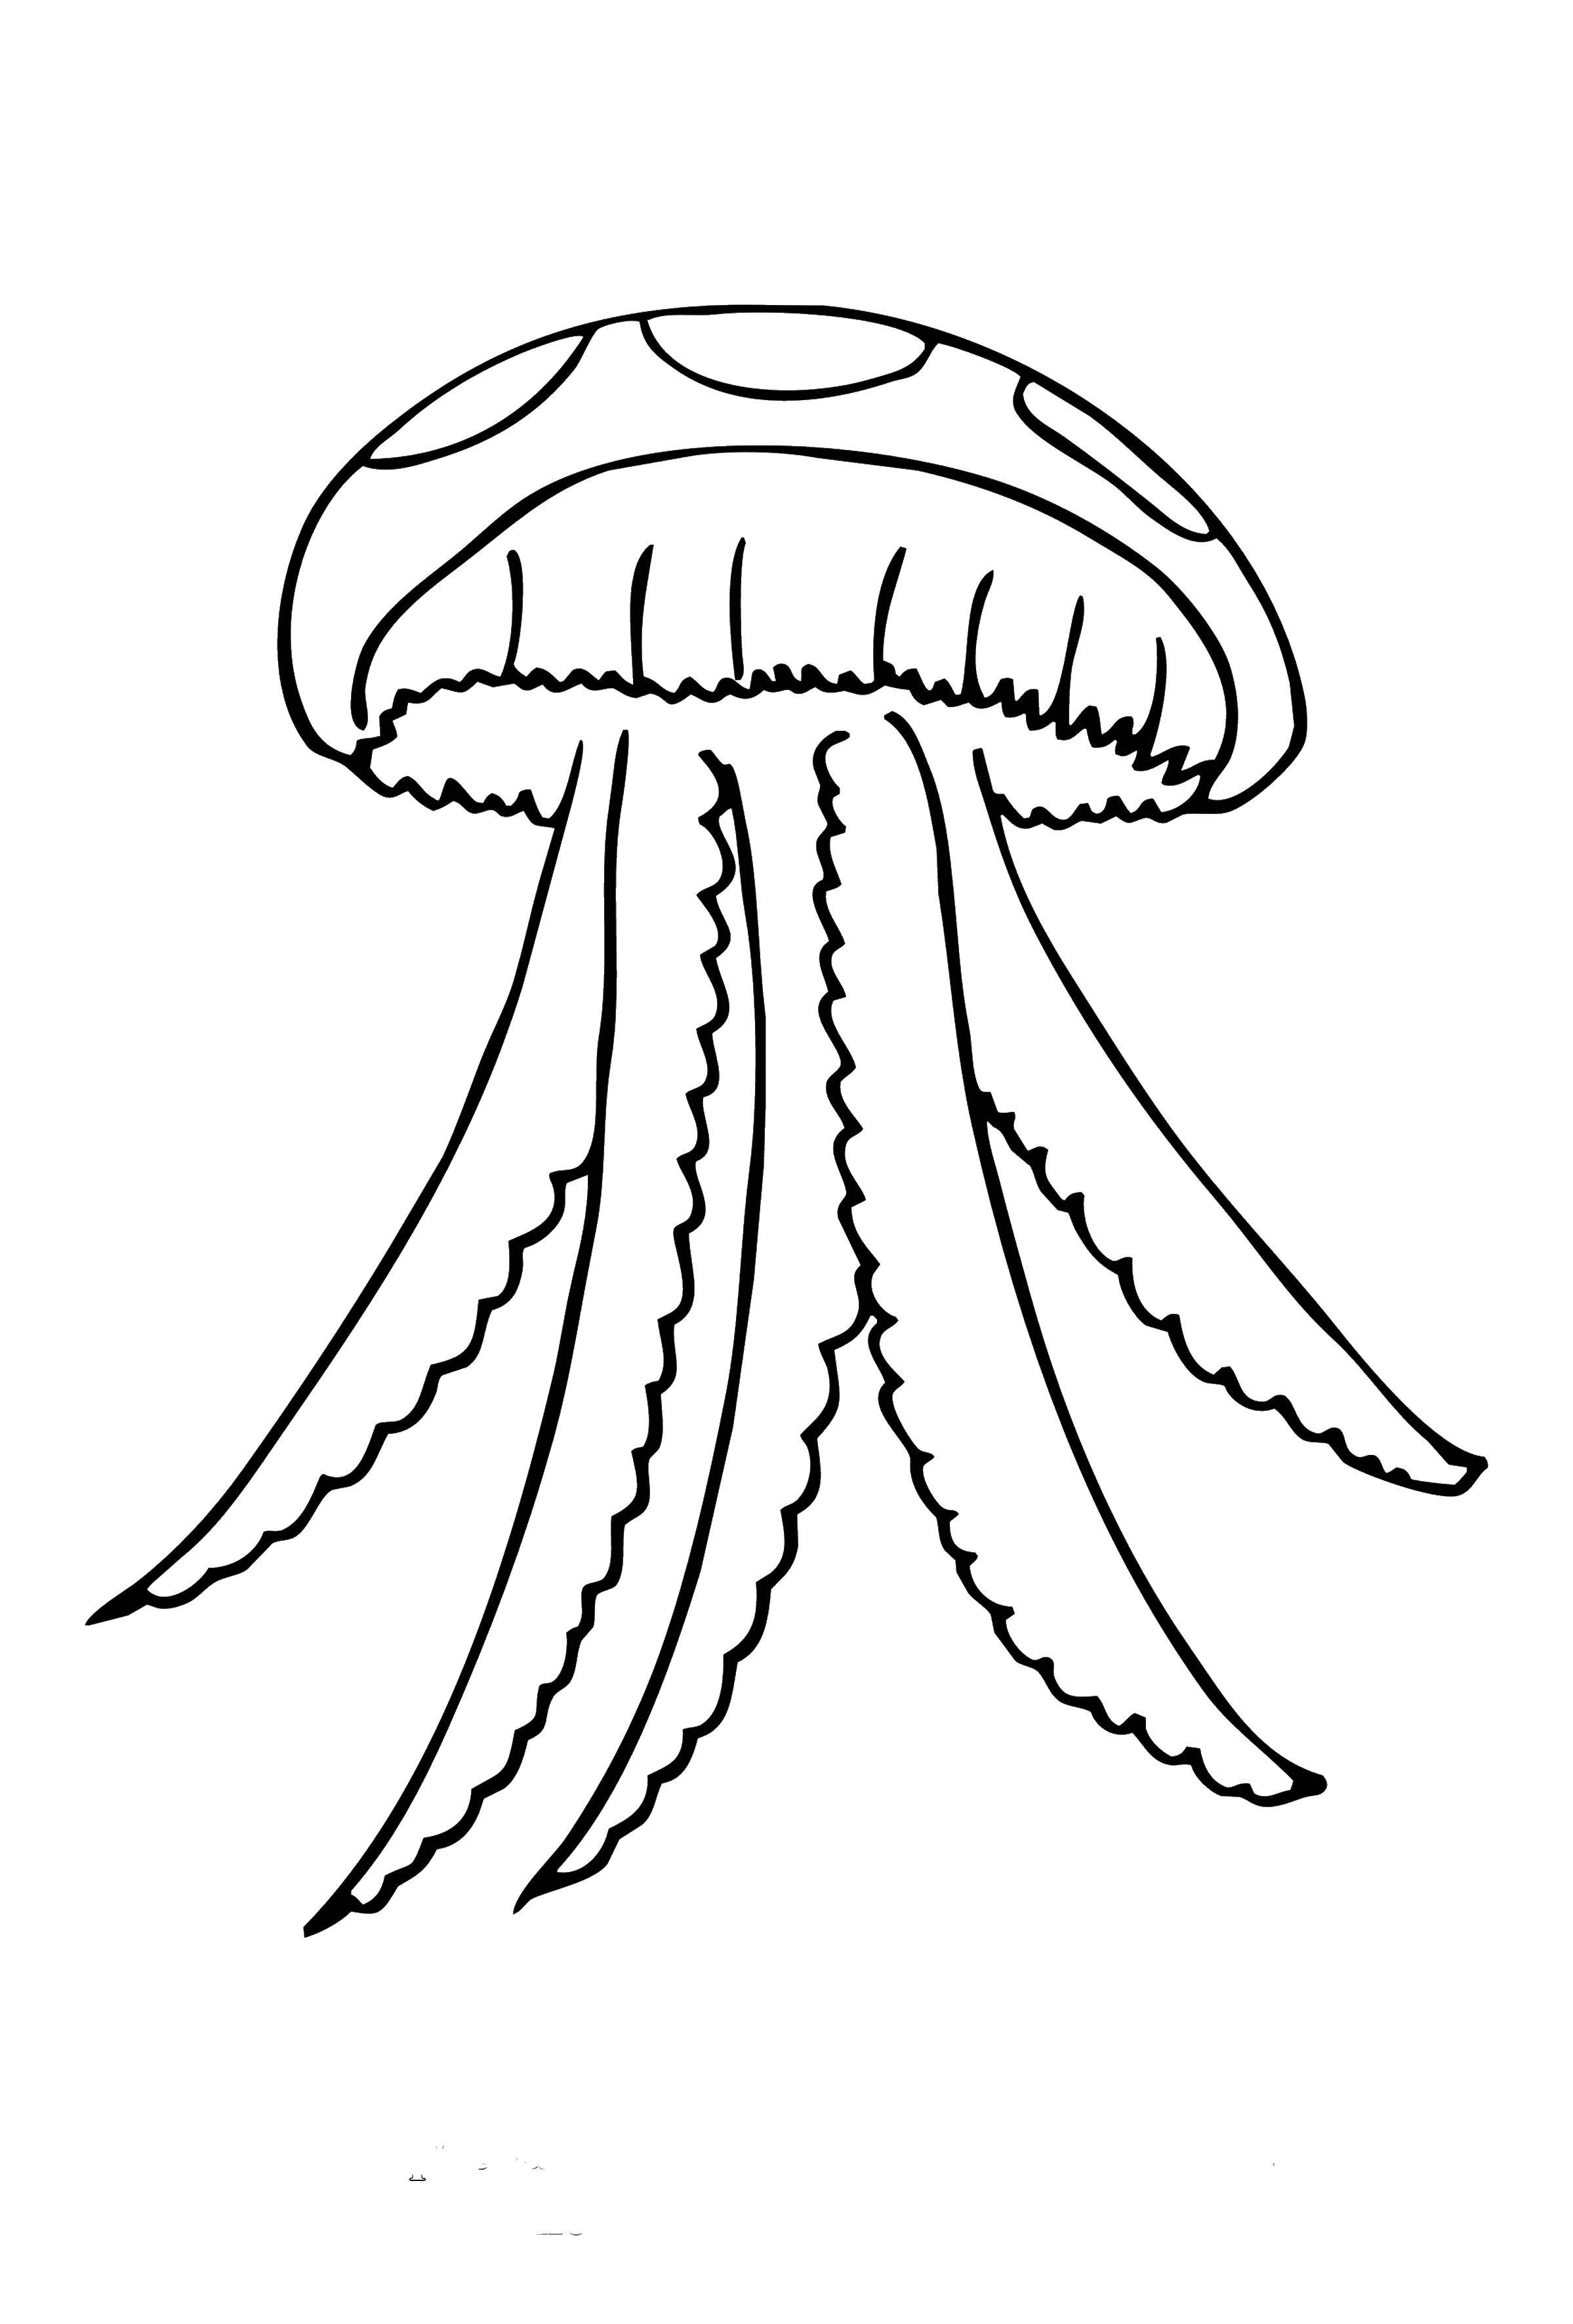 195 Jellyfish Coloring Page Designs: Underwater Beauty in Color 195